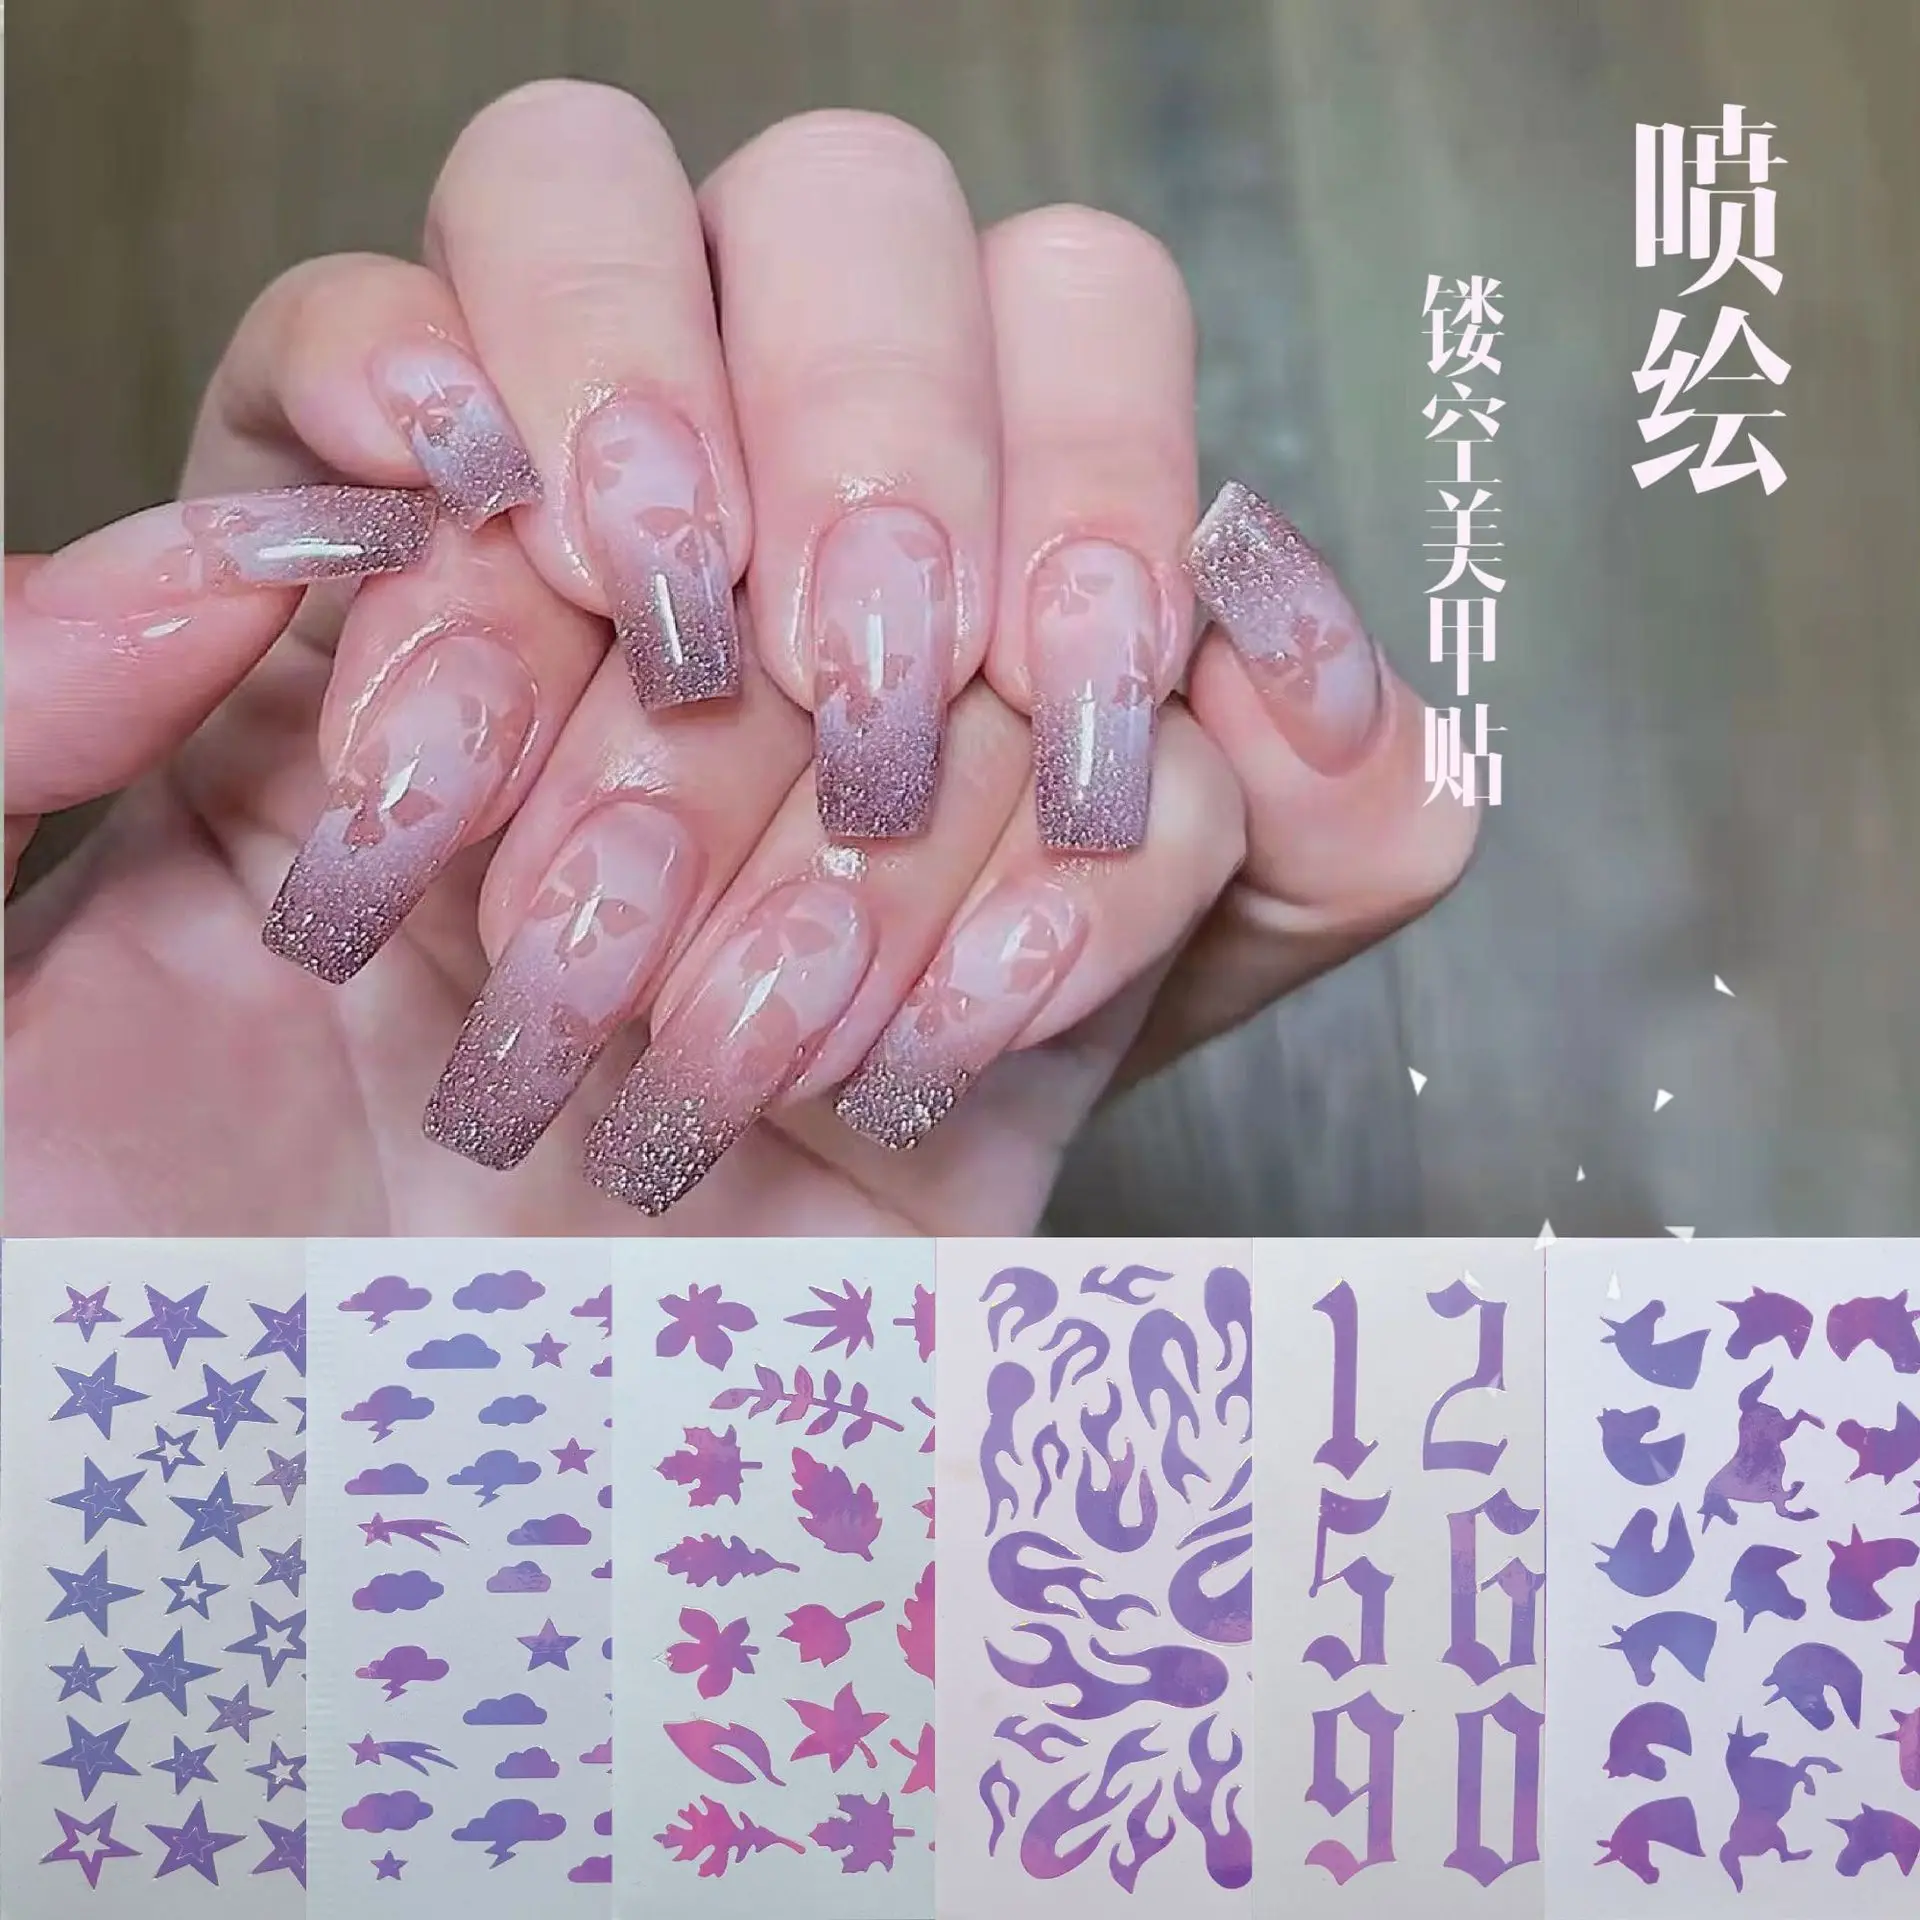 Airbrush Nail Art Stencils Sticker Love Heart Number Butterfly Design  Prints Decals Template Airbrush Nail Salon Supply 1PC - AliExpress